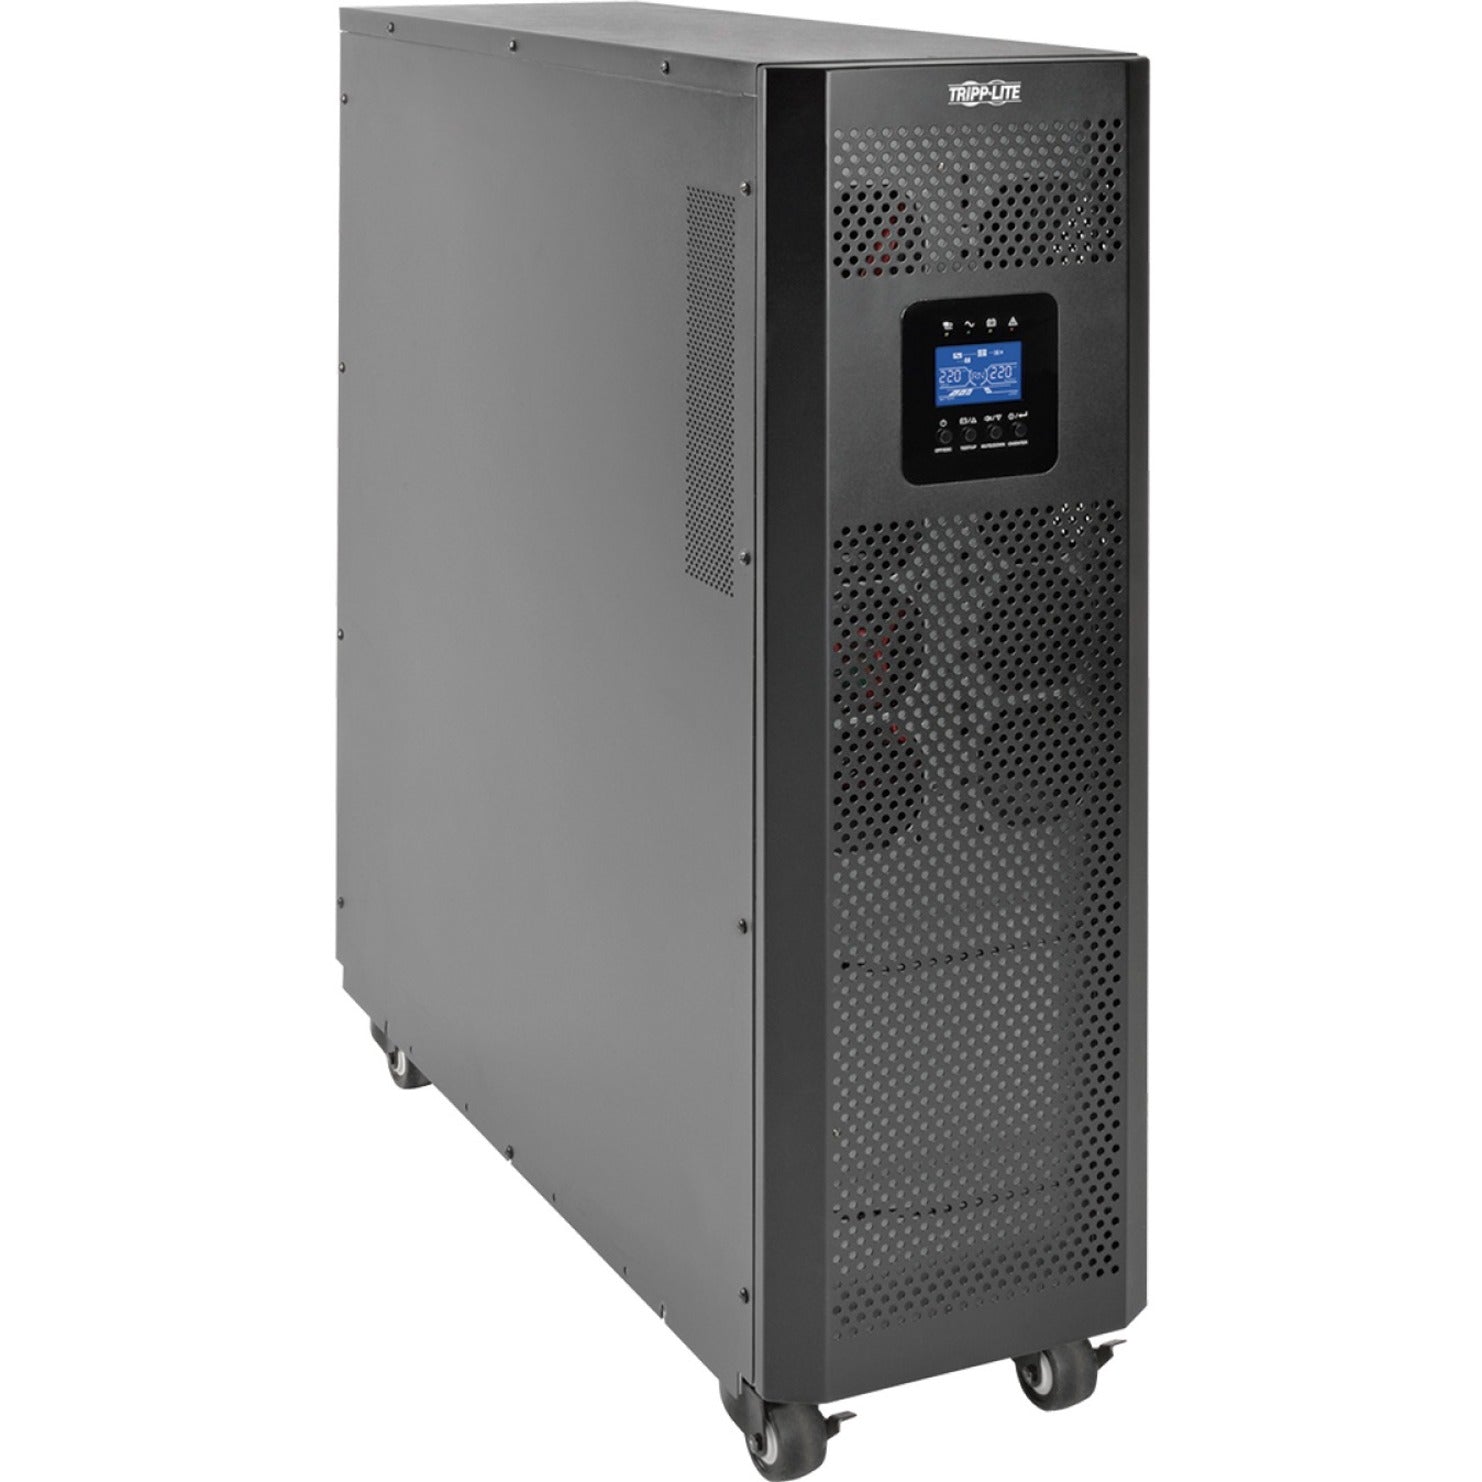 Tripp Lite SVT10KX SmartOnline 10kVA Tower UPS, SNMP/HTTP Remote Monitoring, 1 Year Warranty [Discontinued]